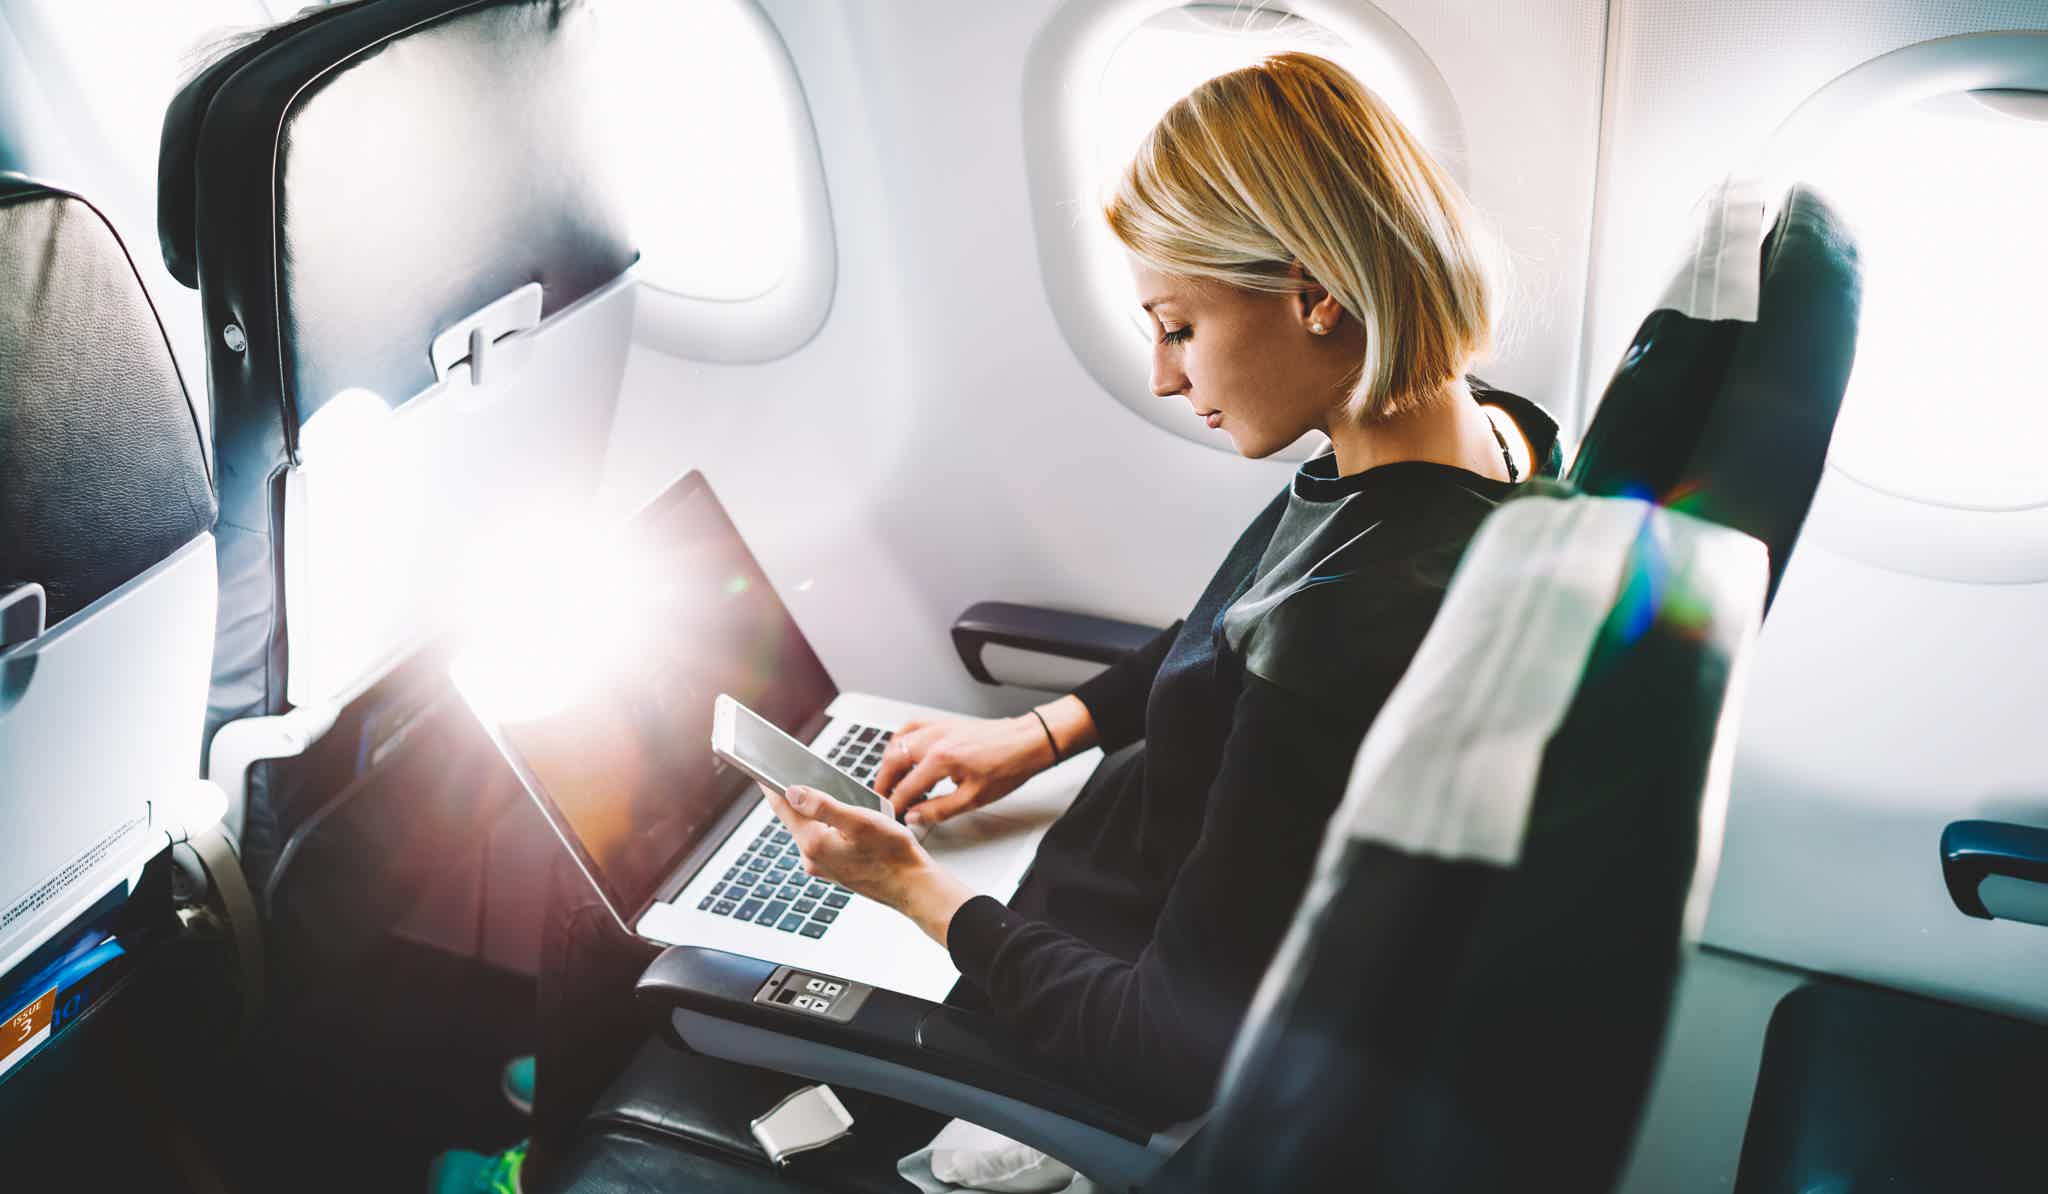 Get your Emirates Skywards Premium with an online application process. Source: Adobe Stock.